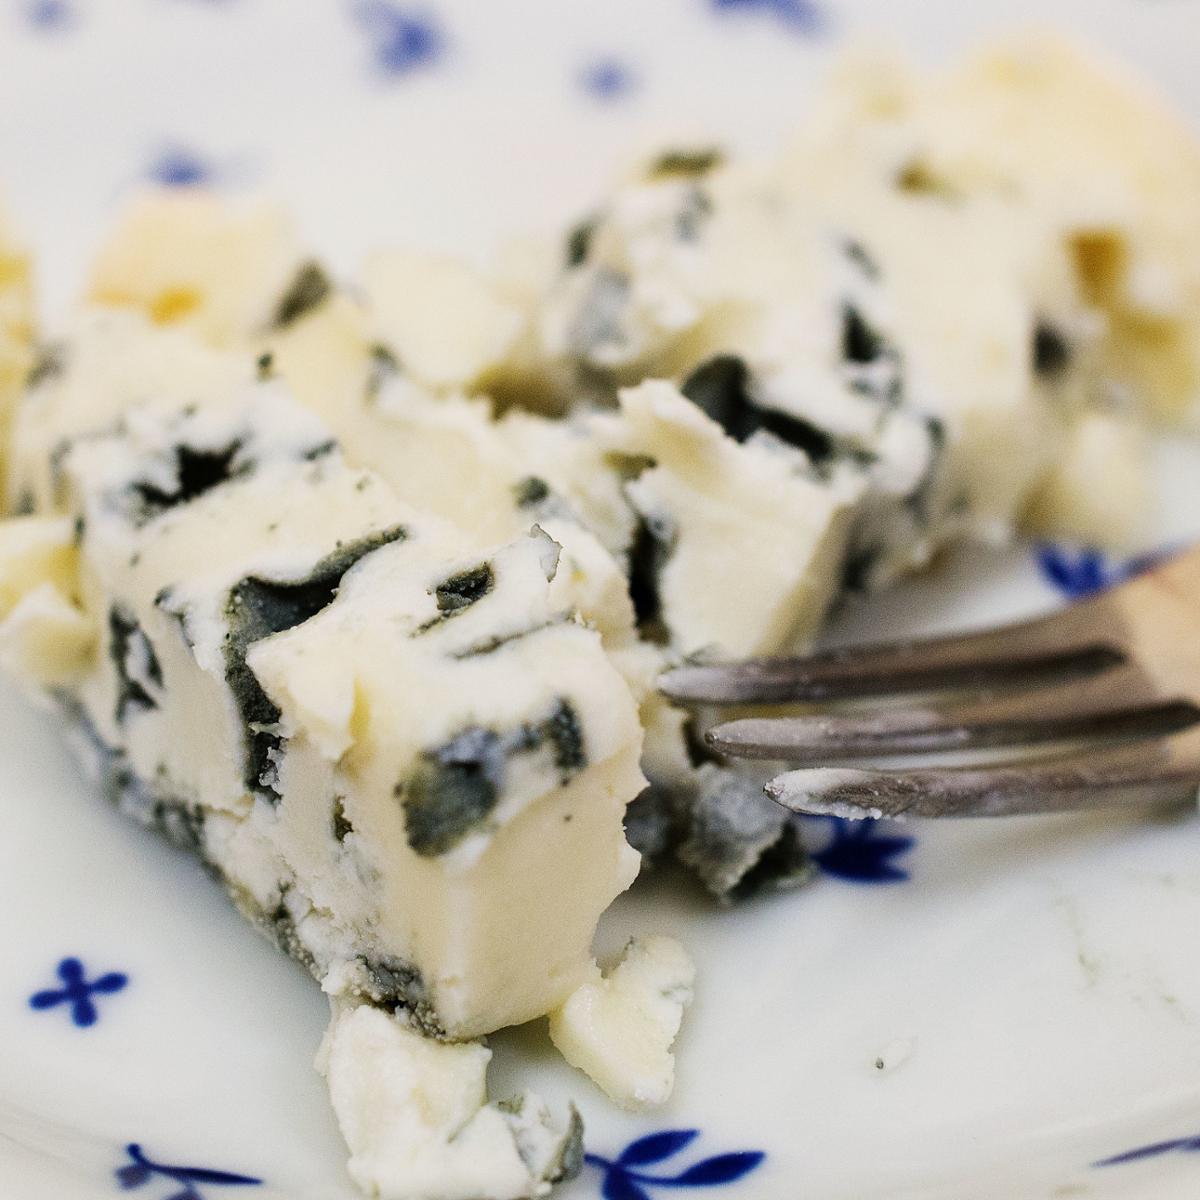 A closeup of blue cheese on a plate with a fork resting next to it